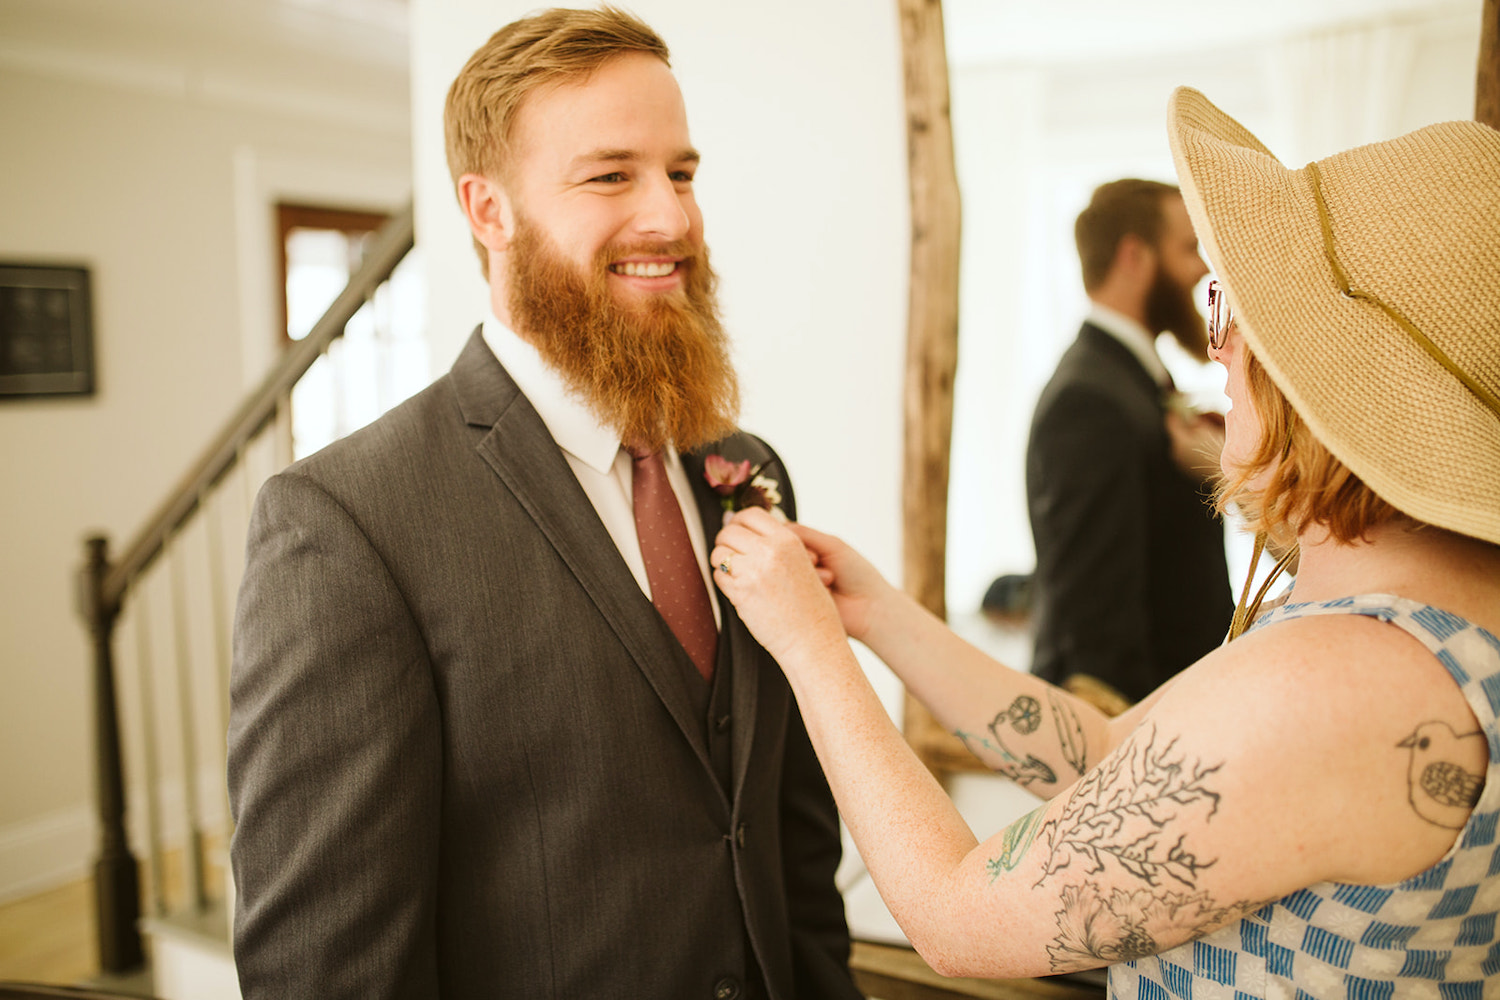 woman in blue and white checkered shirt and floppy hat pins boutonniere on groom's gray suit coat while he smiles